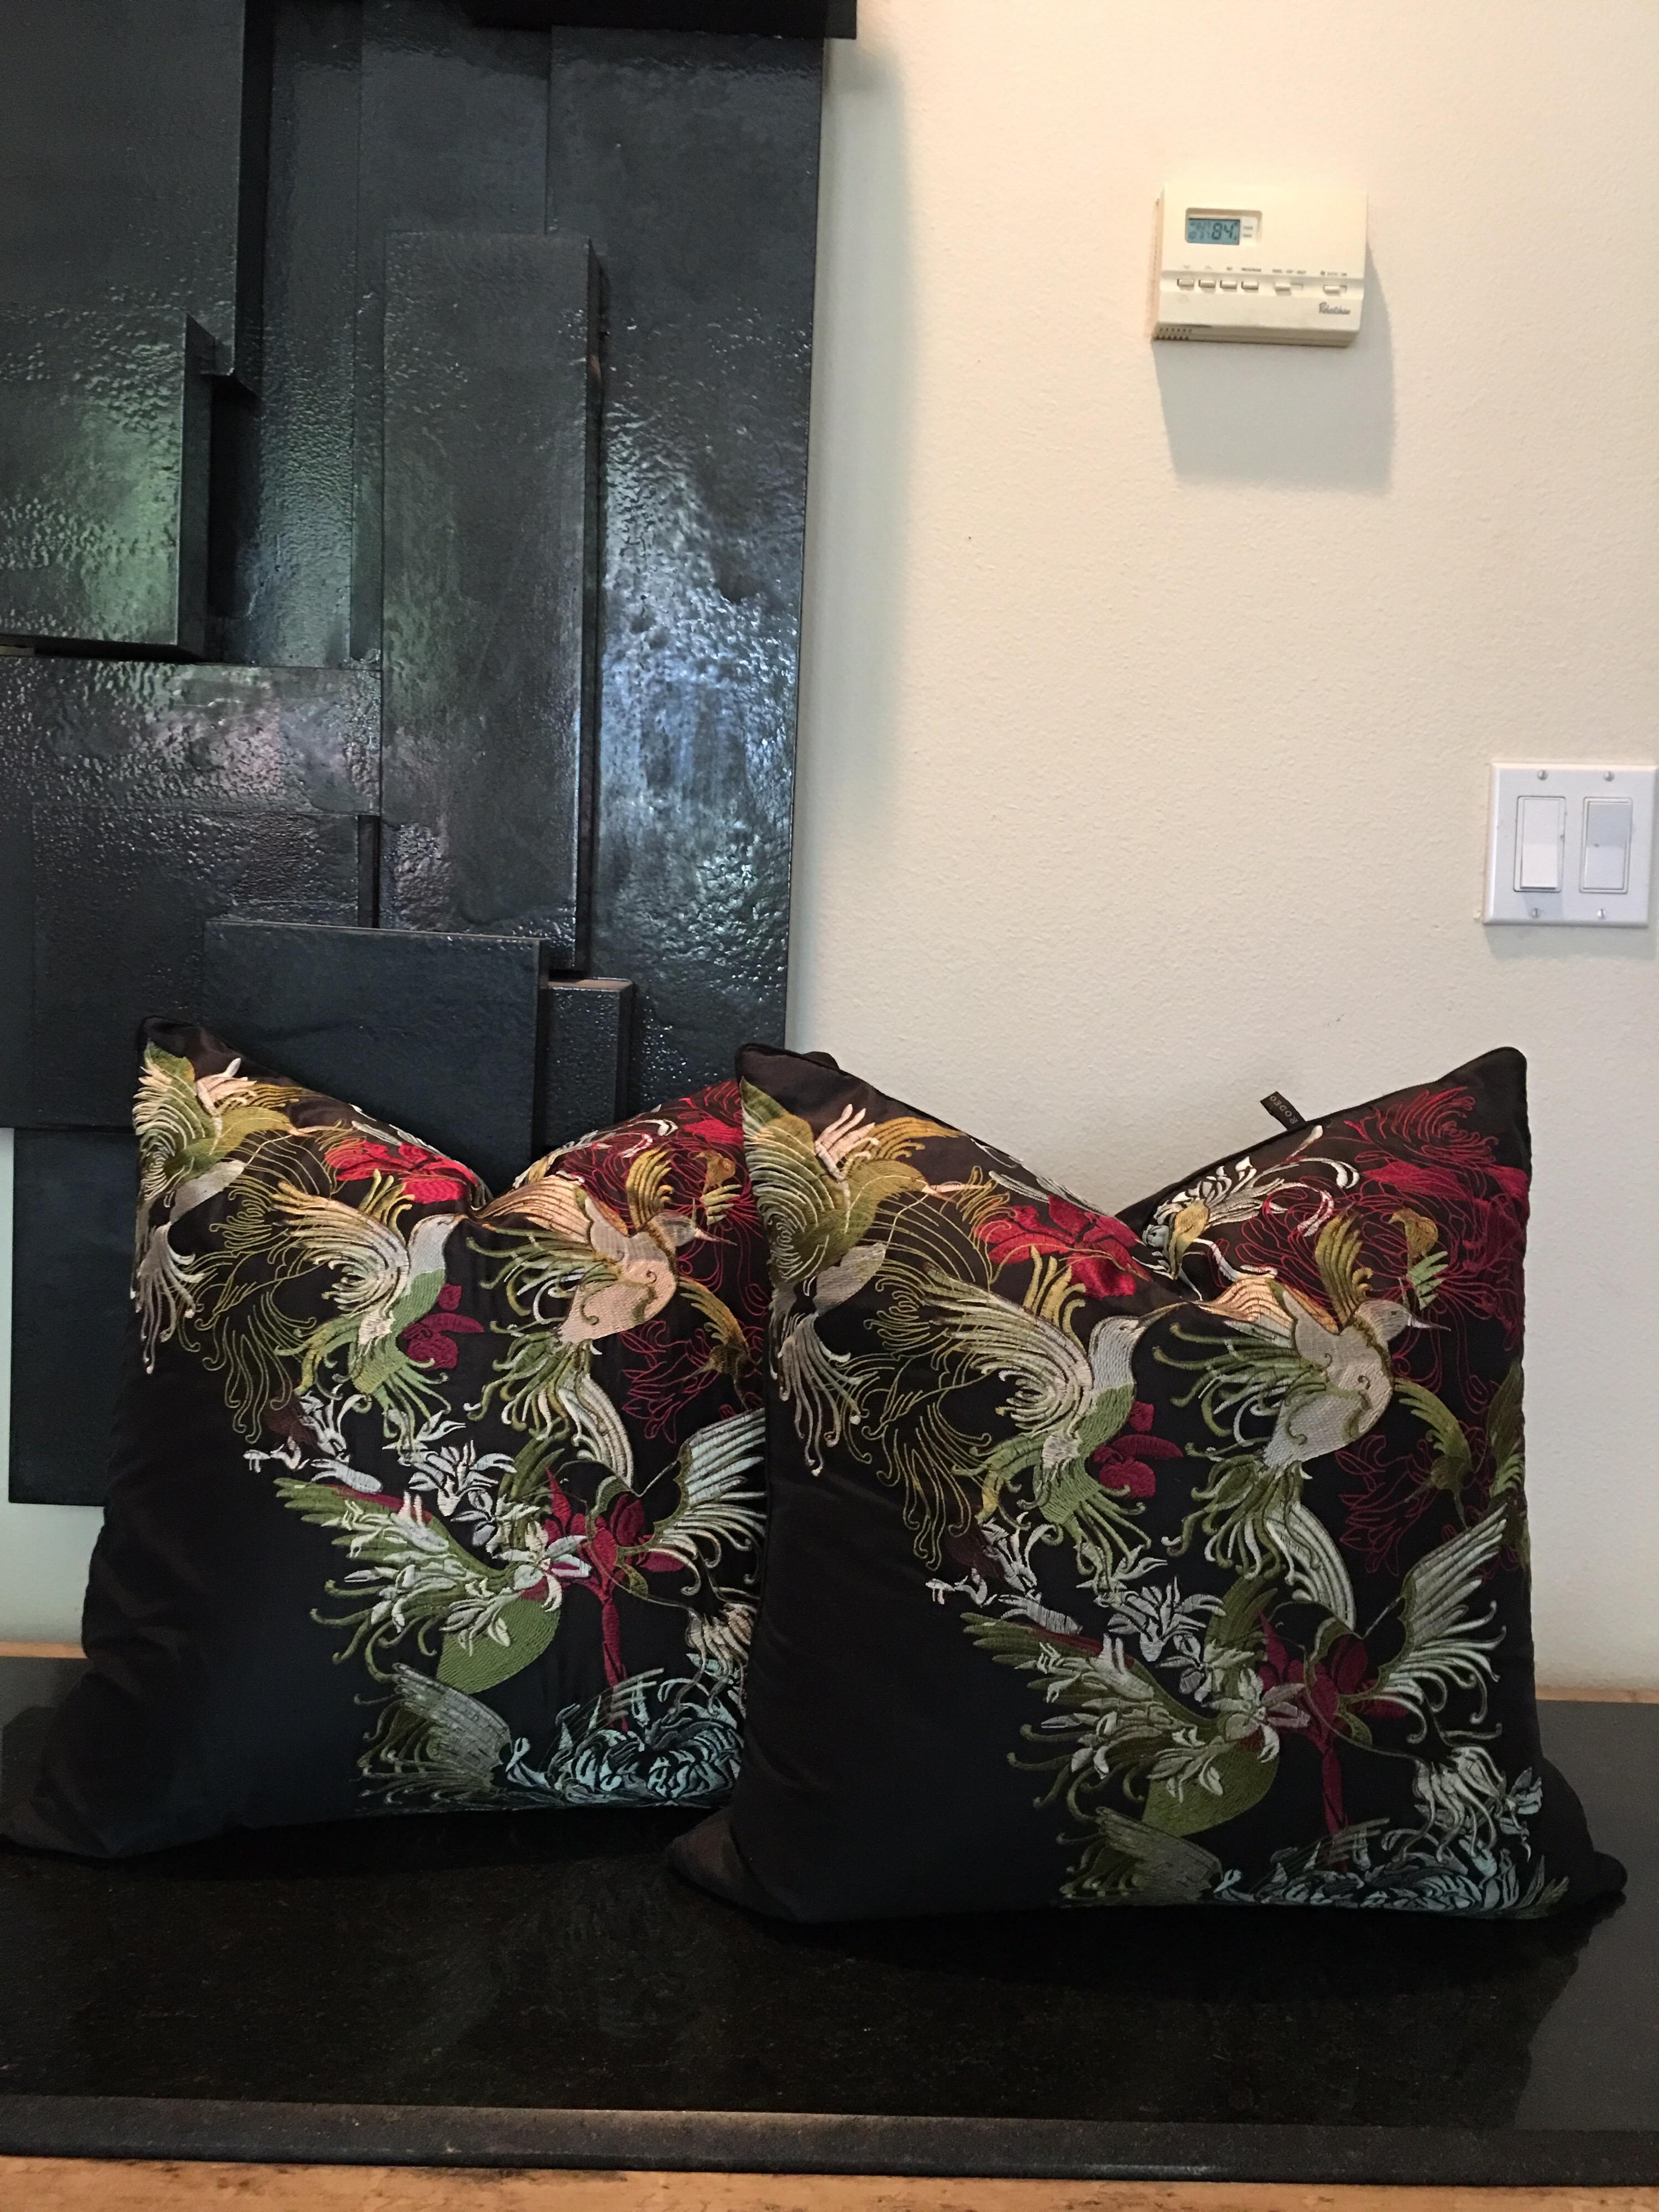 These very high-end pillows made by rodeo home of Beverly Hills were special ordered by a designer for a Palm Springs project but never used. High end faux black silk, they are intricately embroidered in citreon green, ruby and silvery white. Filled